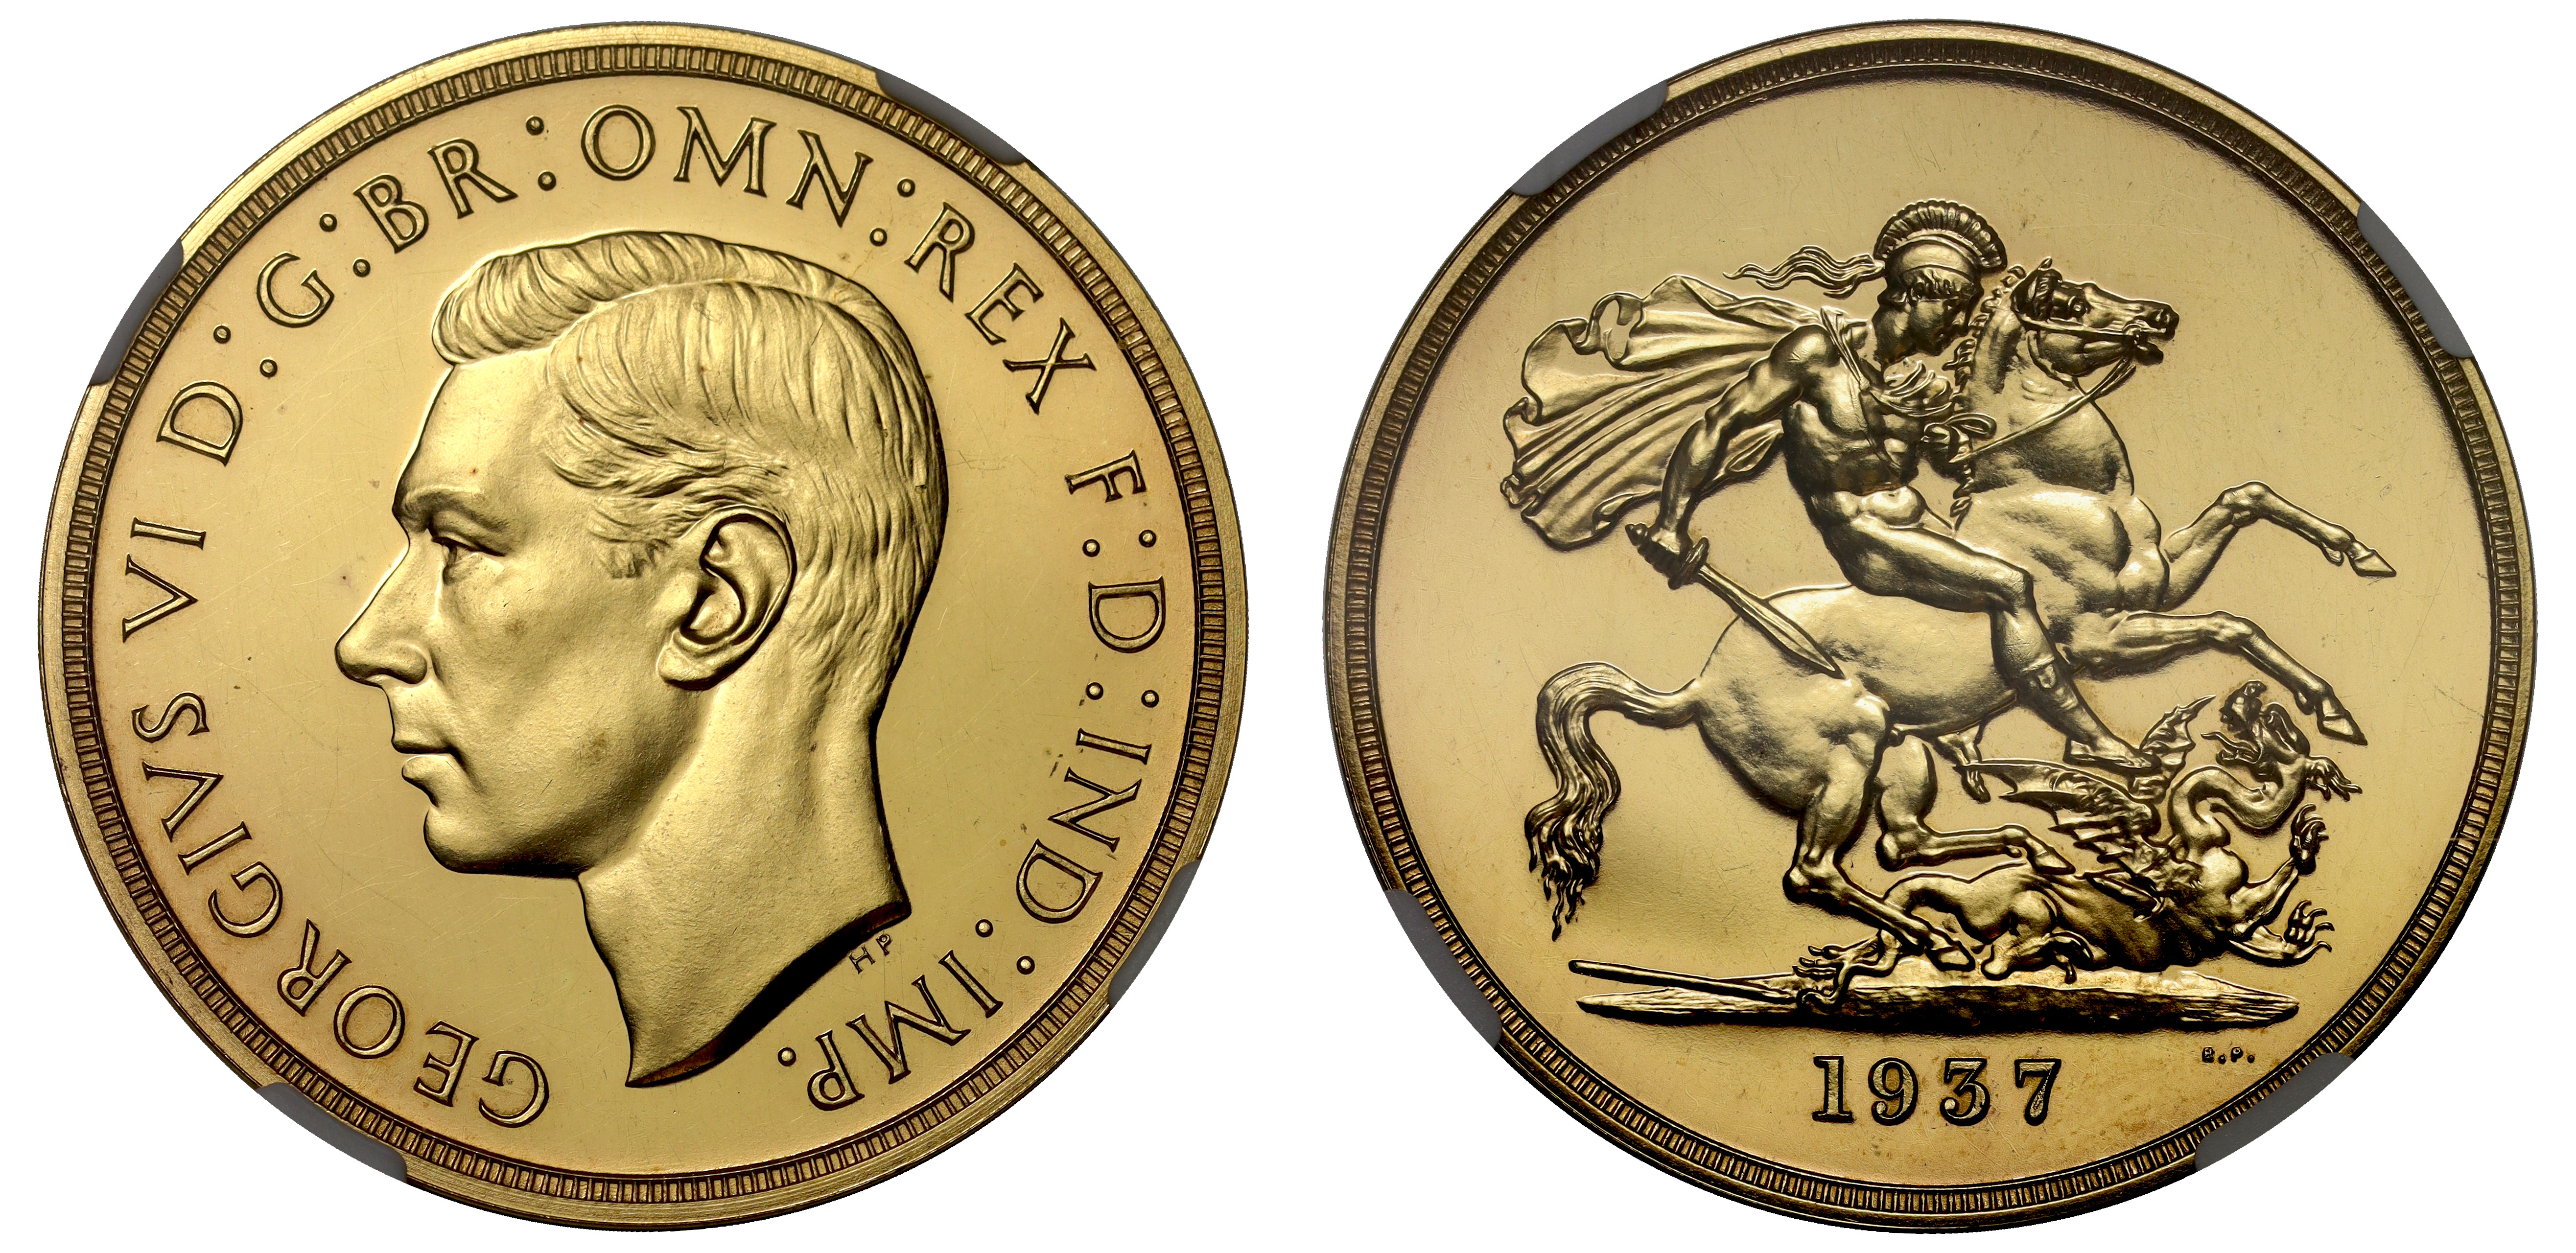 g George VI (1936-52), gold proof Five Pounds, 1937, Coronation issue, bare head left, HP below